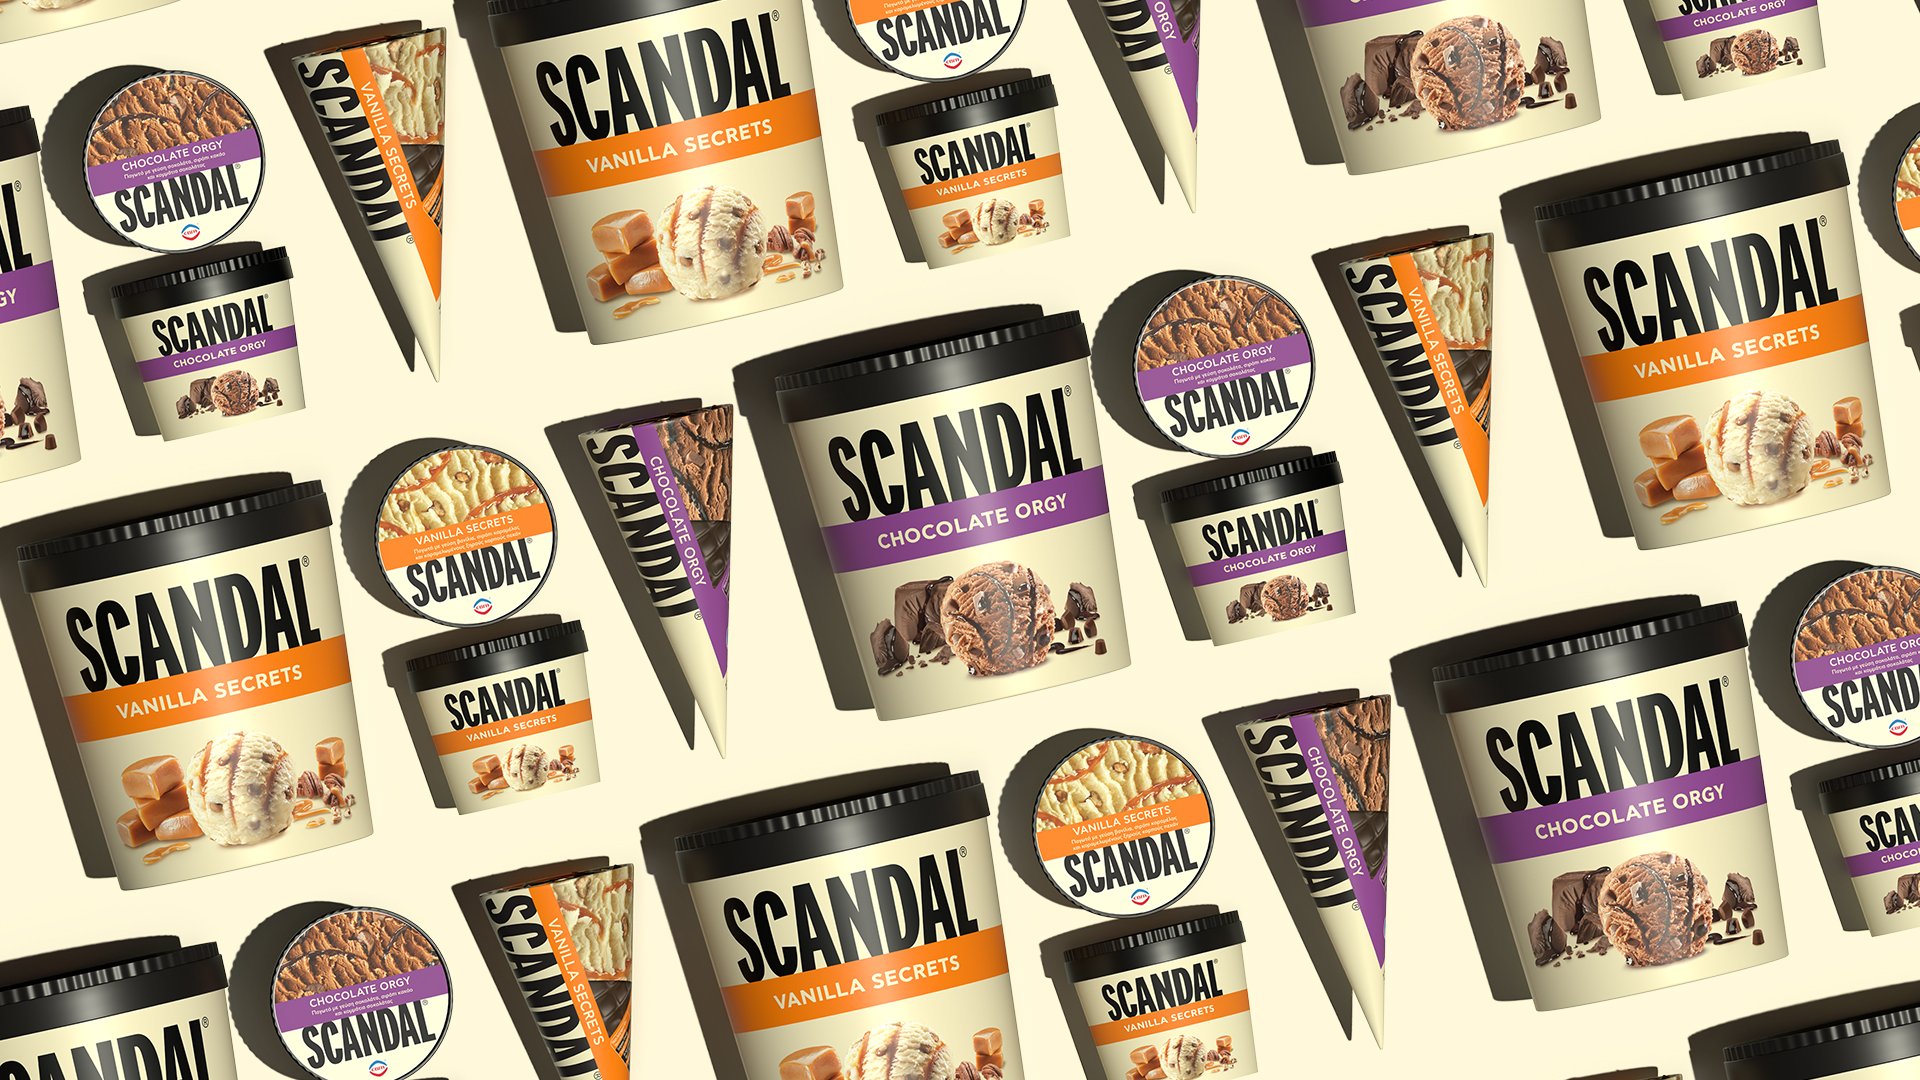 All redesigned Scandal ice creams product packages aligned